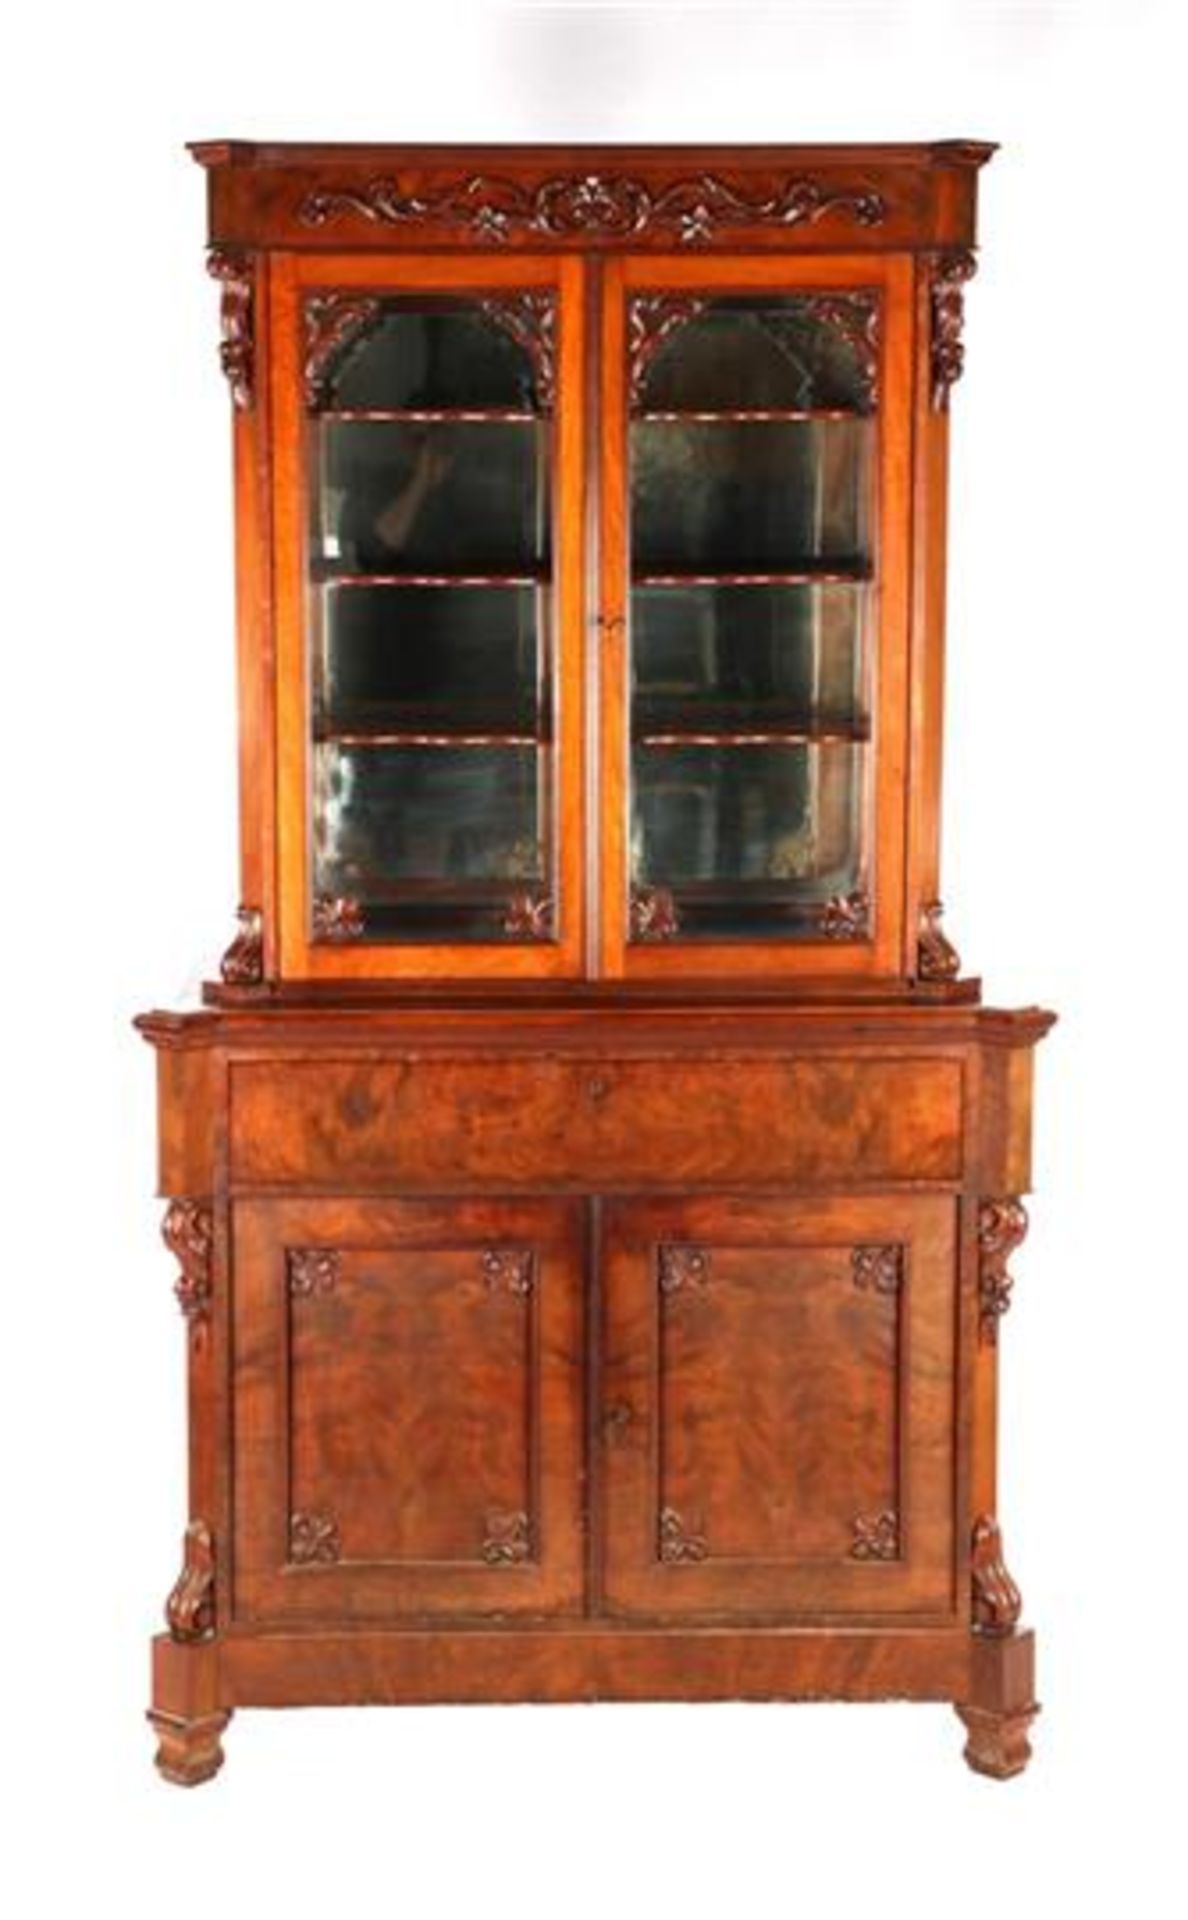 Mahogany veneer on oak 2-part cabinet with 2-door base cabinet with pull-out writing area and 2-door